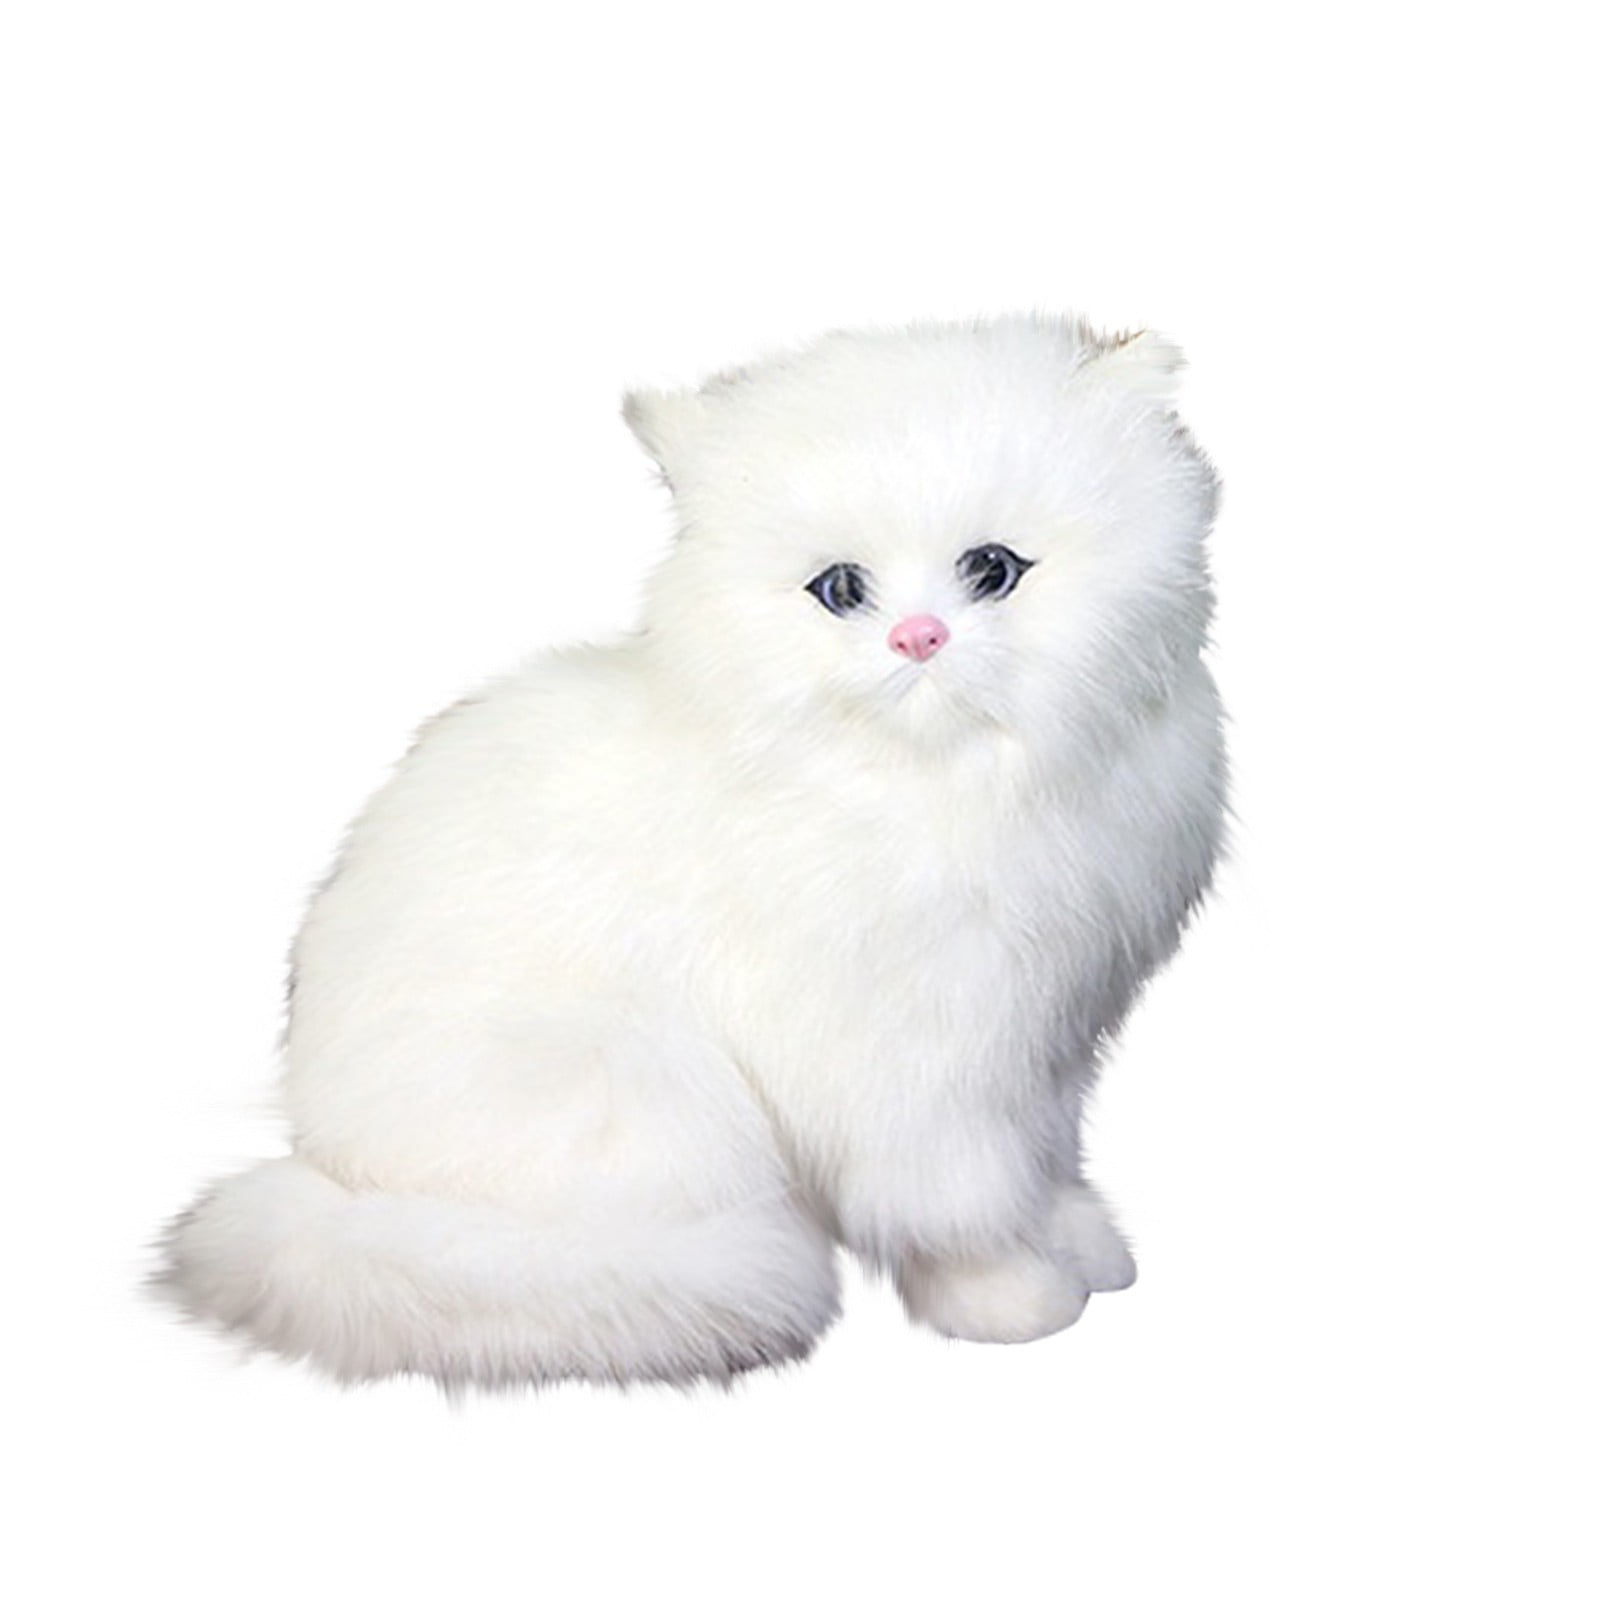 Lifelike Realistic Persian Cat Plush Toy Stand Animals Models Decor Doll Cute